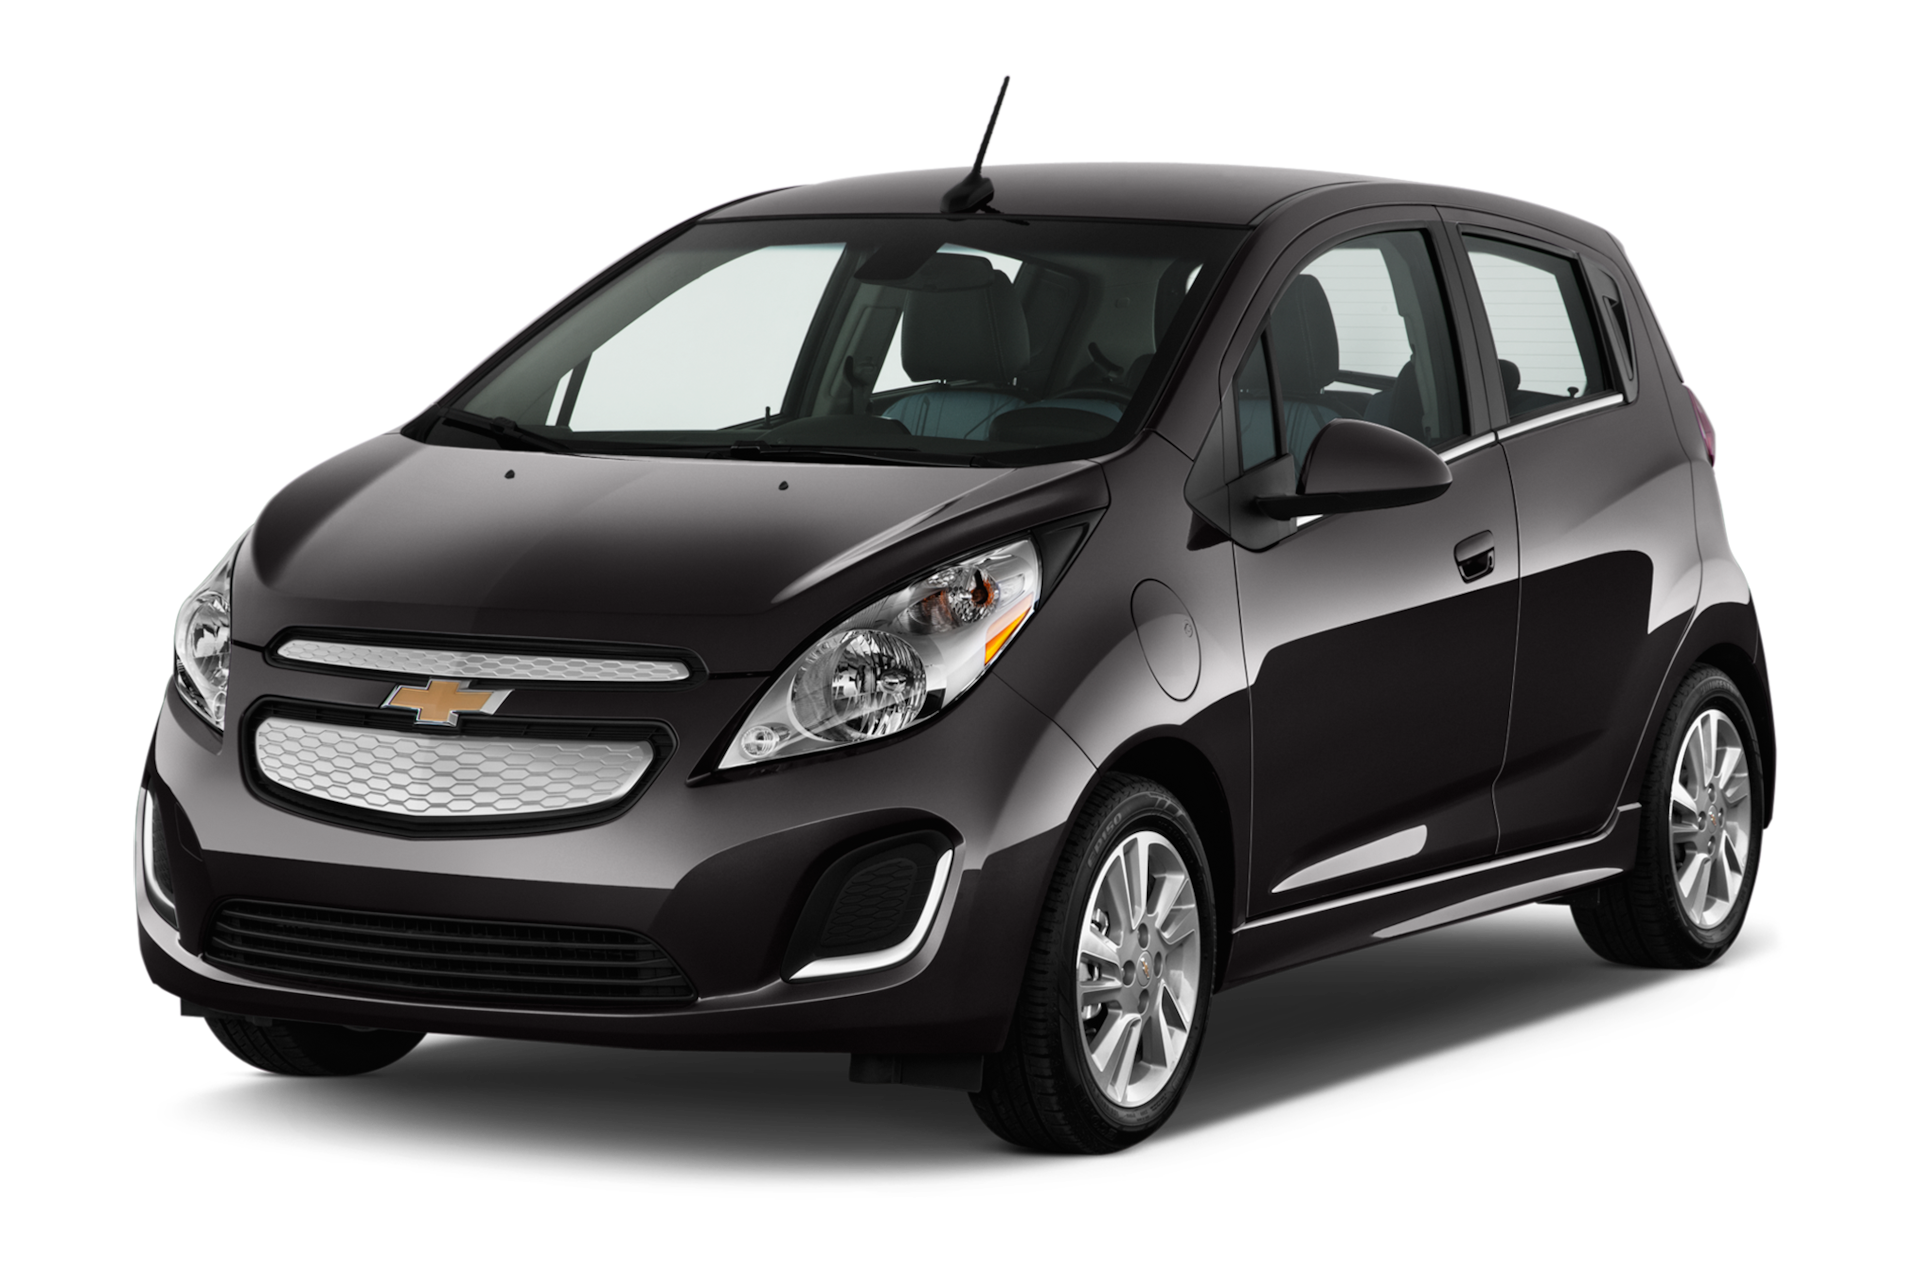 2016 Chevrolet Spark EV Prices, Reviews, and Photos - MotorTrend